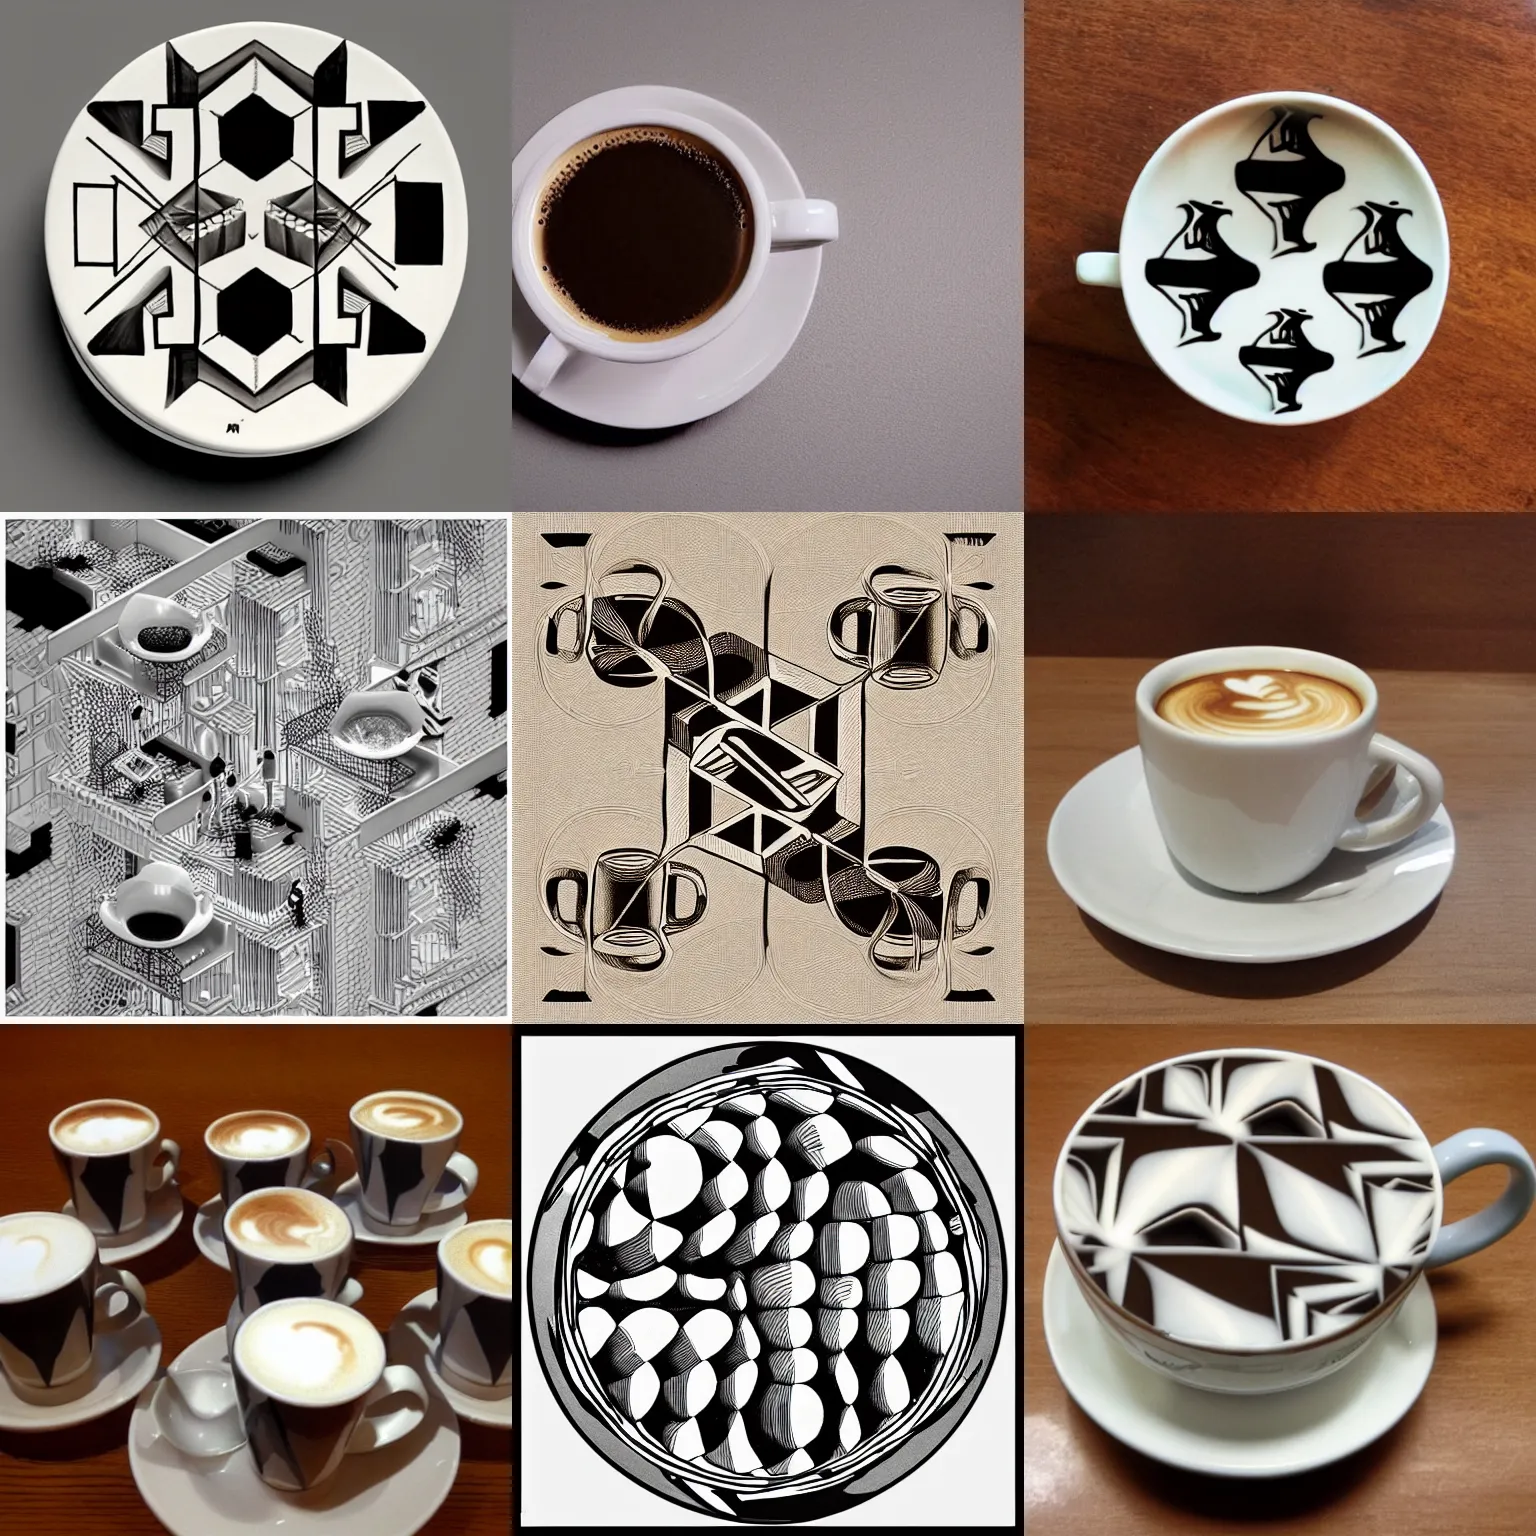 Premium AI Image  Barista makes latte art using latte pen in a beautiful  cup on a picturesque saucer